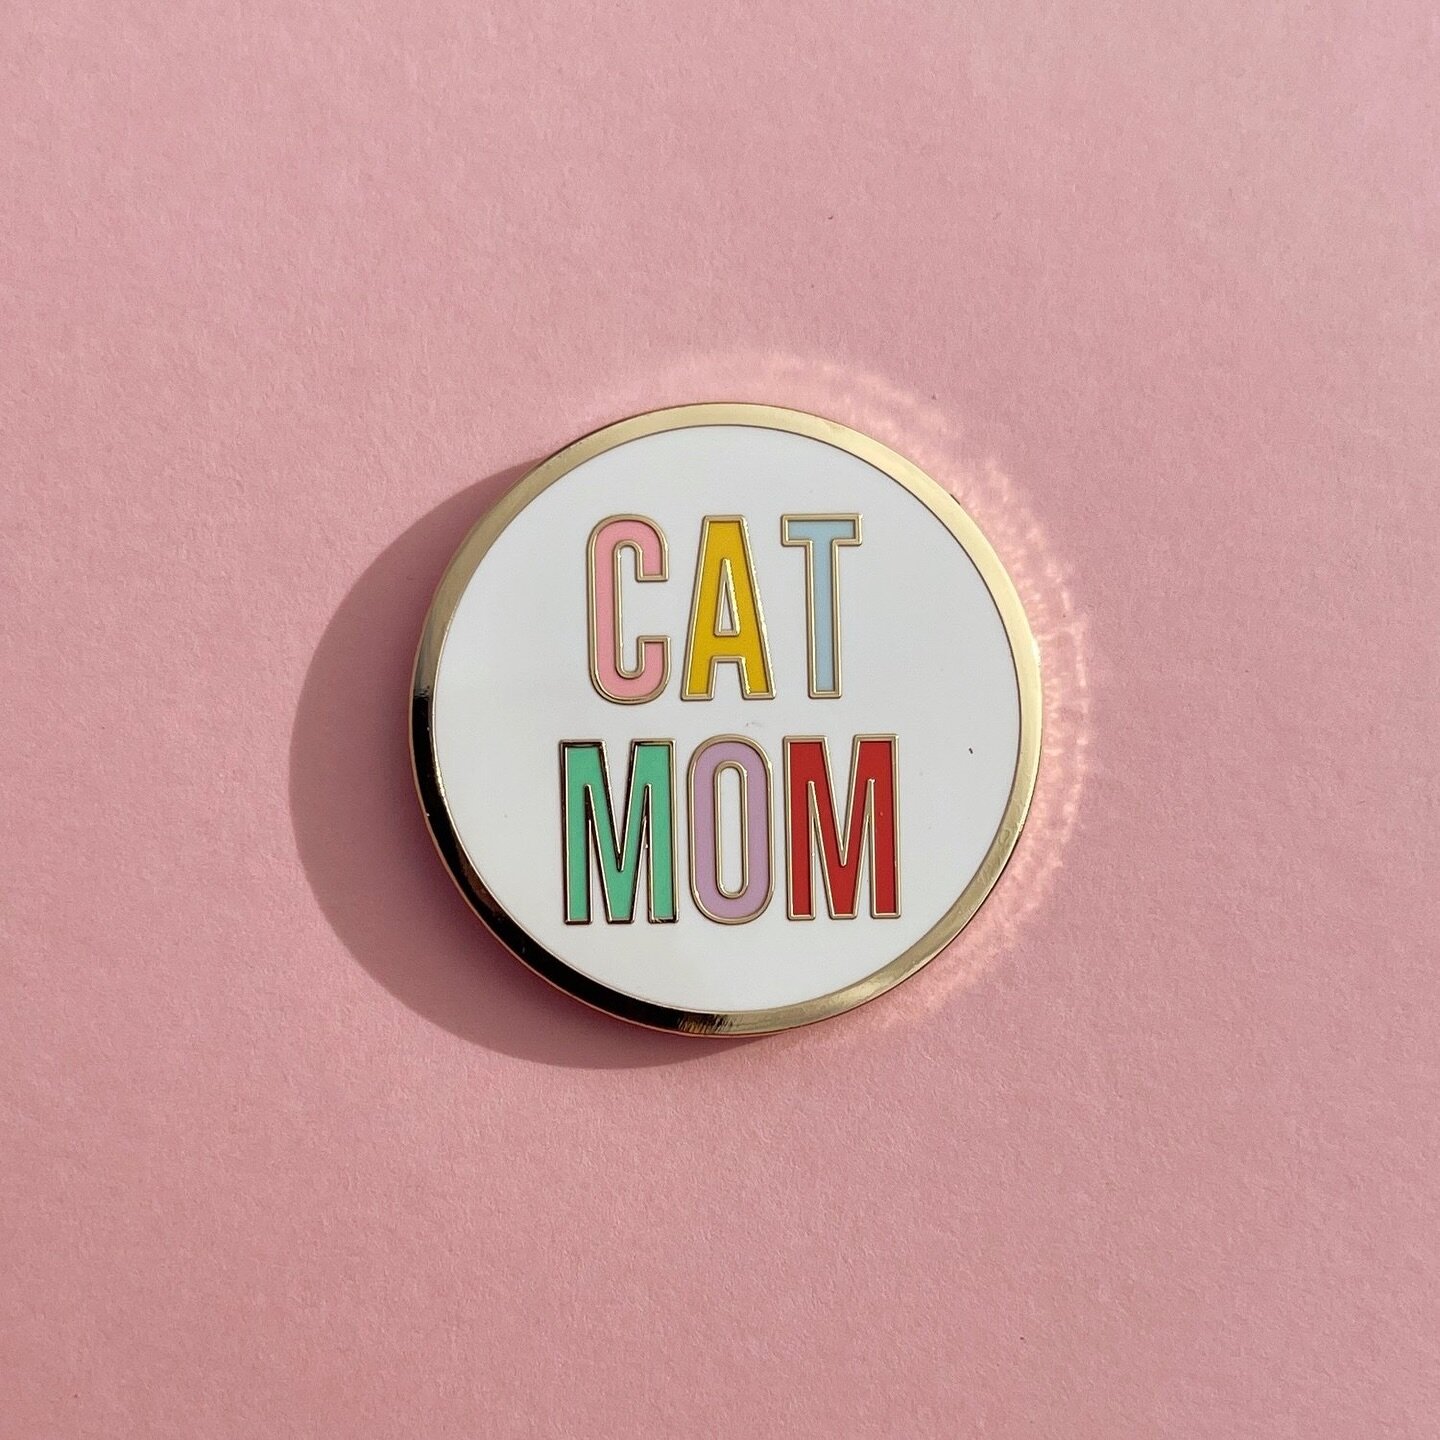 Cat mom pins make the cutest gift! And they&rsquo;re currently on clearance $.50 🙀🫶🏻 #lulubloo #pinoftheday #pins #enamelpin #pincommunity #catmom #catmomlife #catlady #catladylife #catladytribe